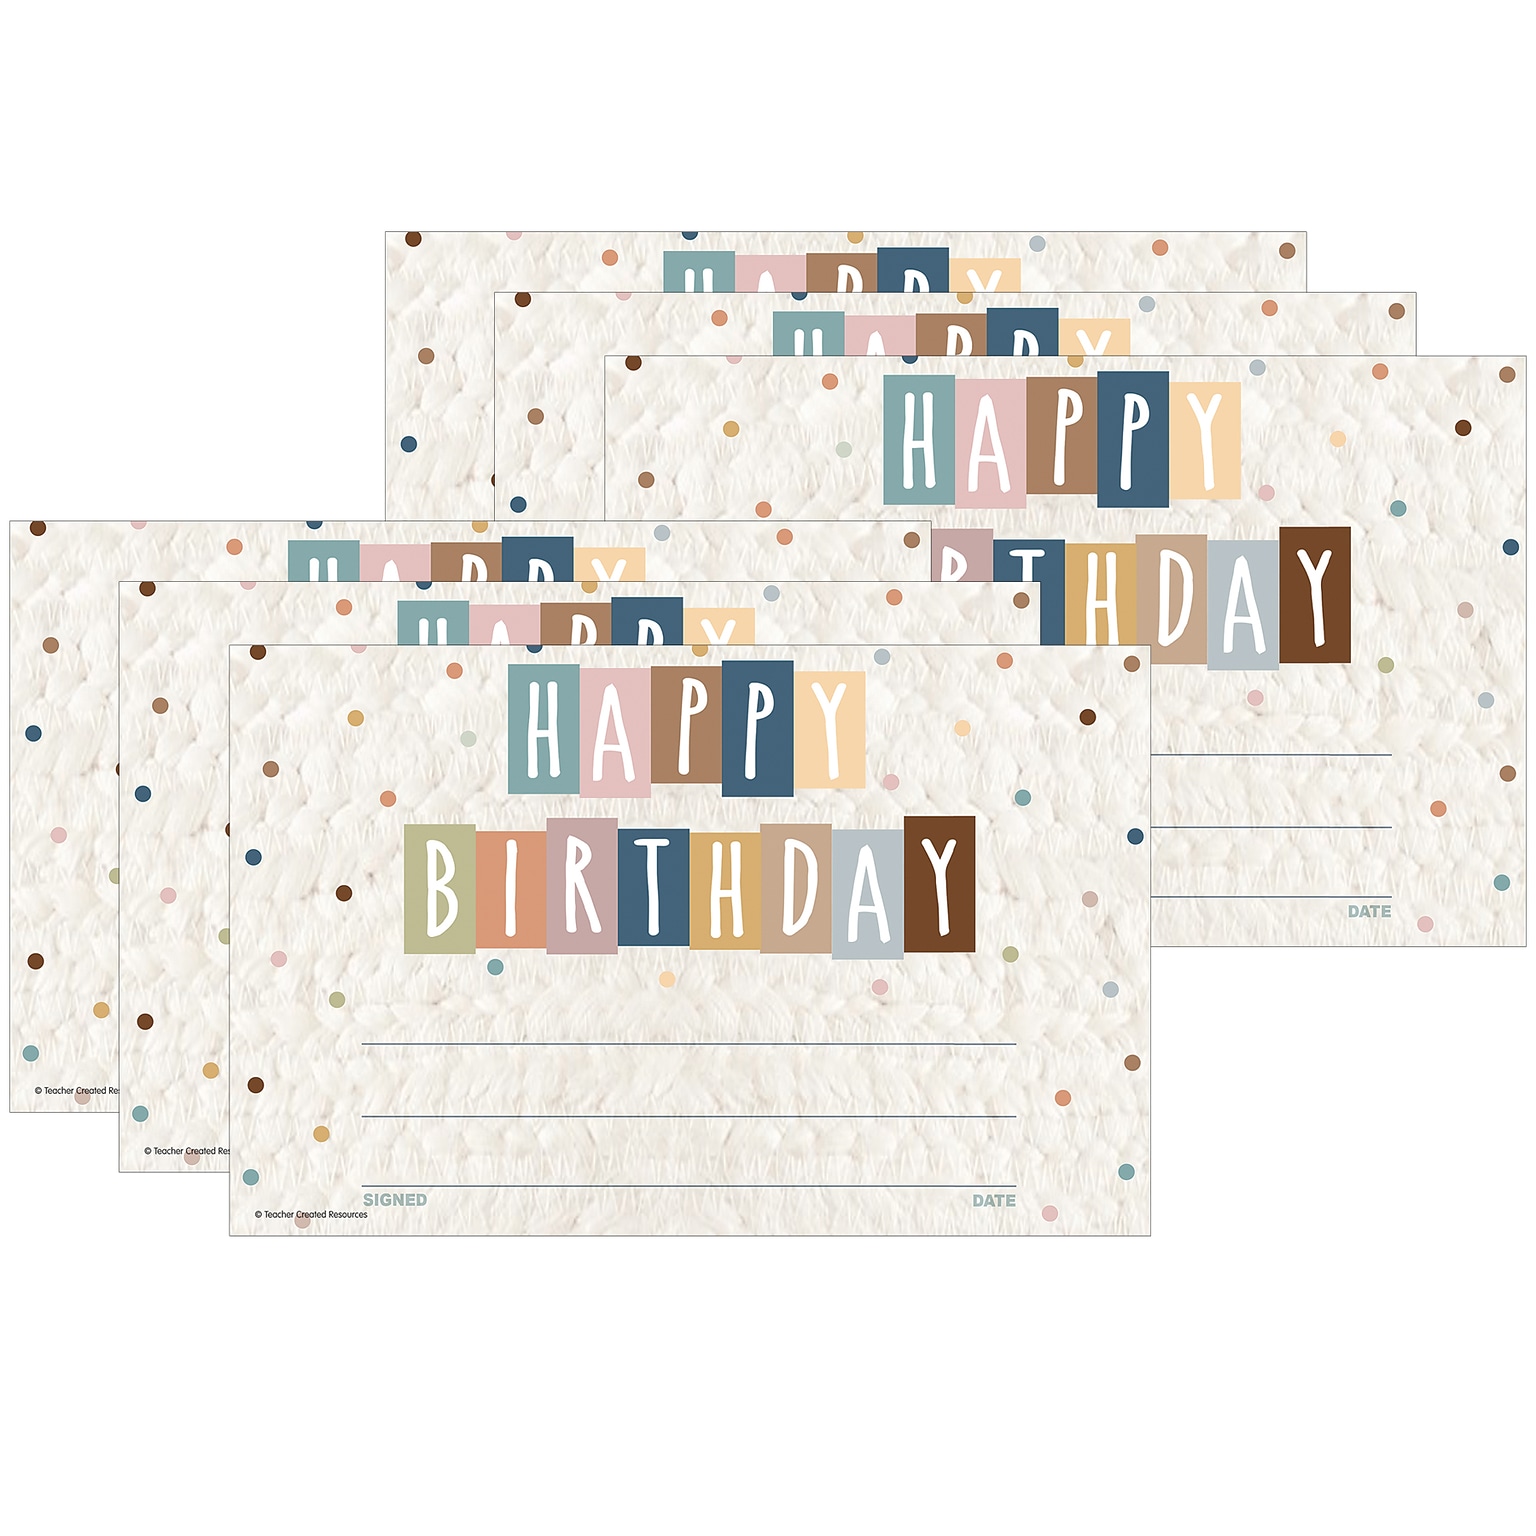 Teacher Created Resources Happy Birthday Awards, 8.5 x 5.5, Multicolor, 30/Pack, 6 Pack/Bundle (TCR7135-6)